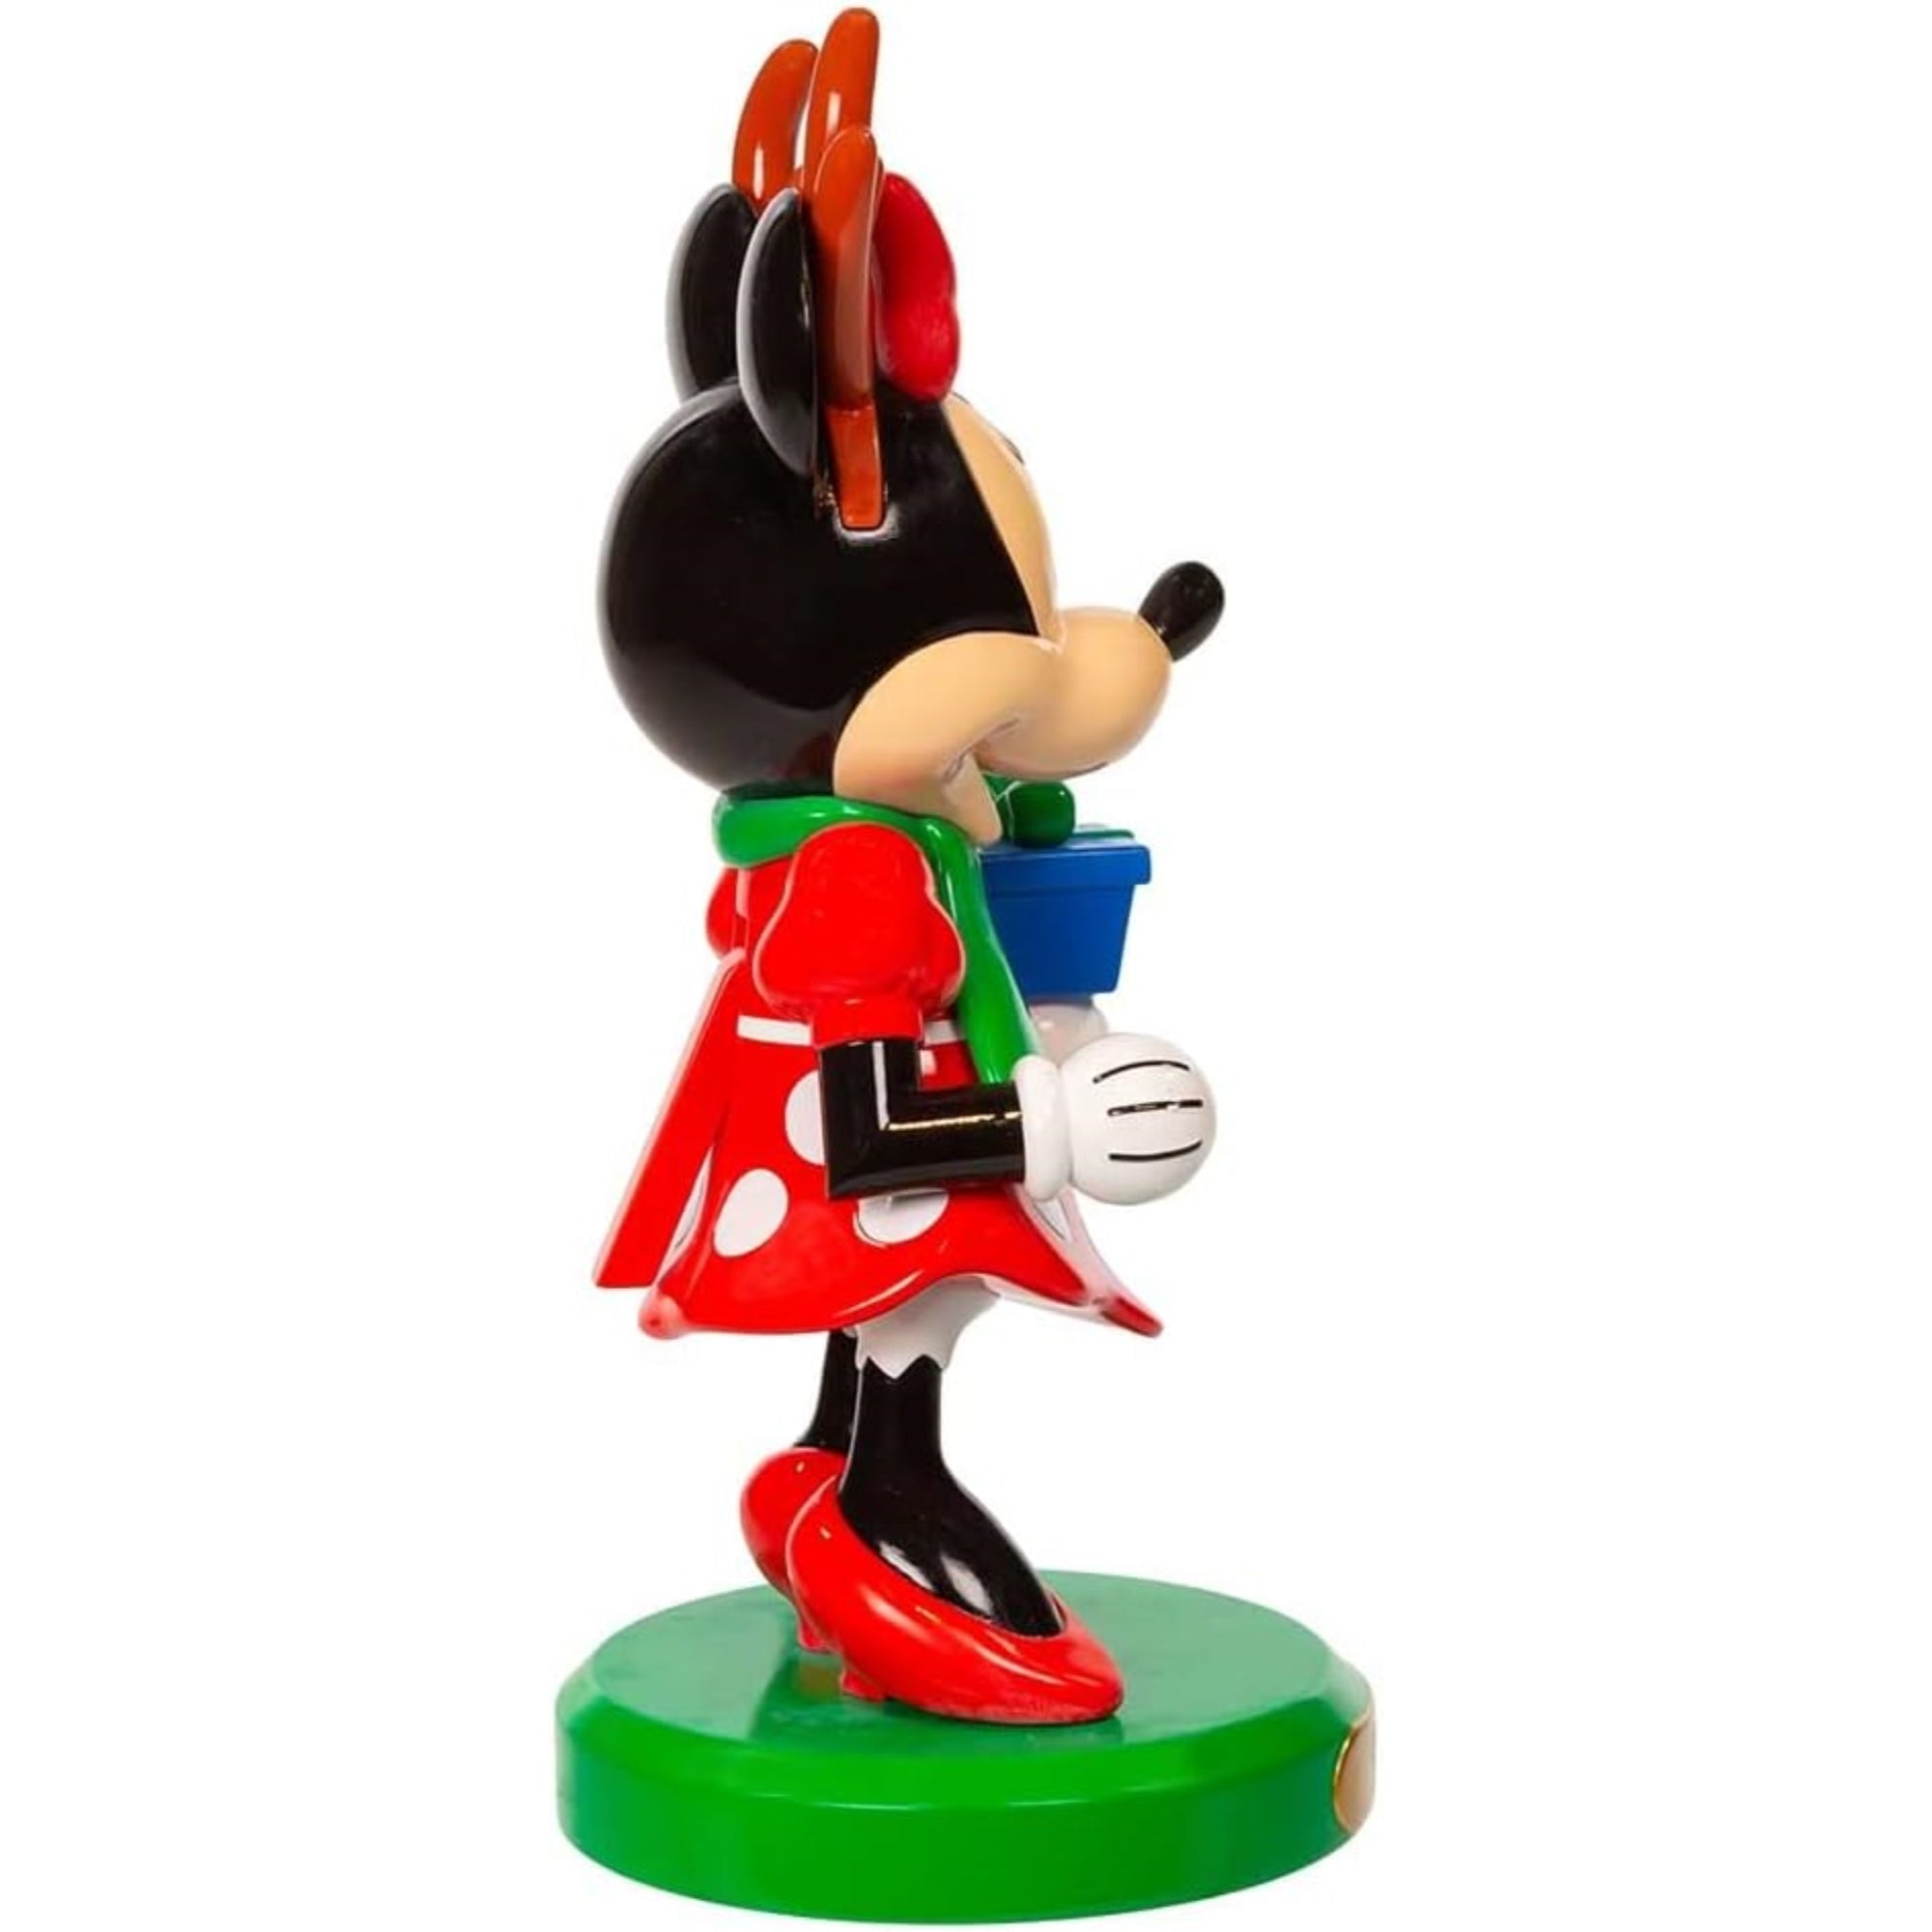 Kurt Adler Disney Minnie Mouse with Antlers and Present Nutcracker, 6"